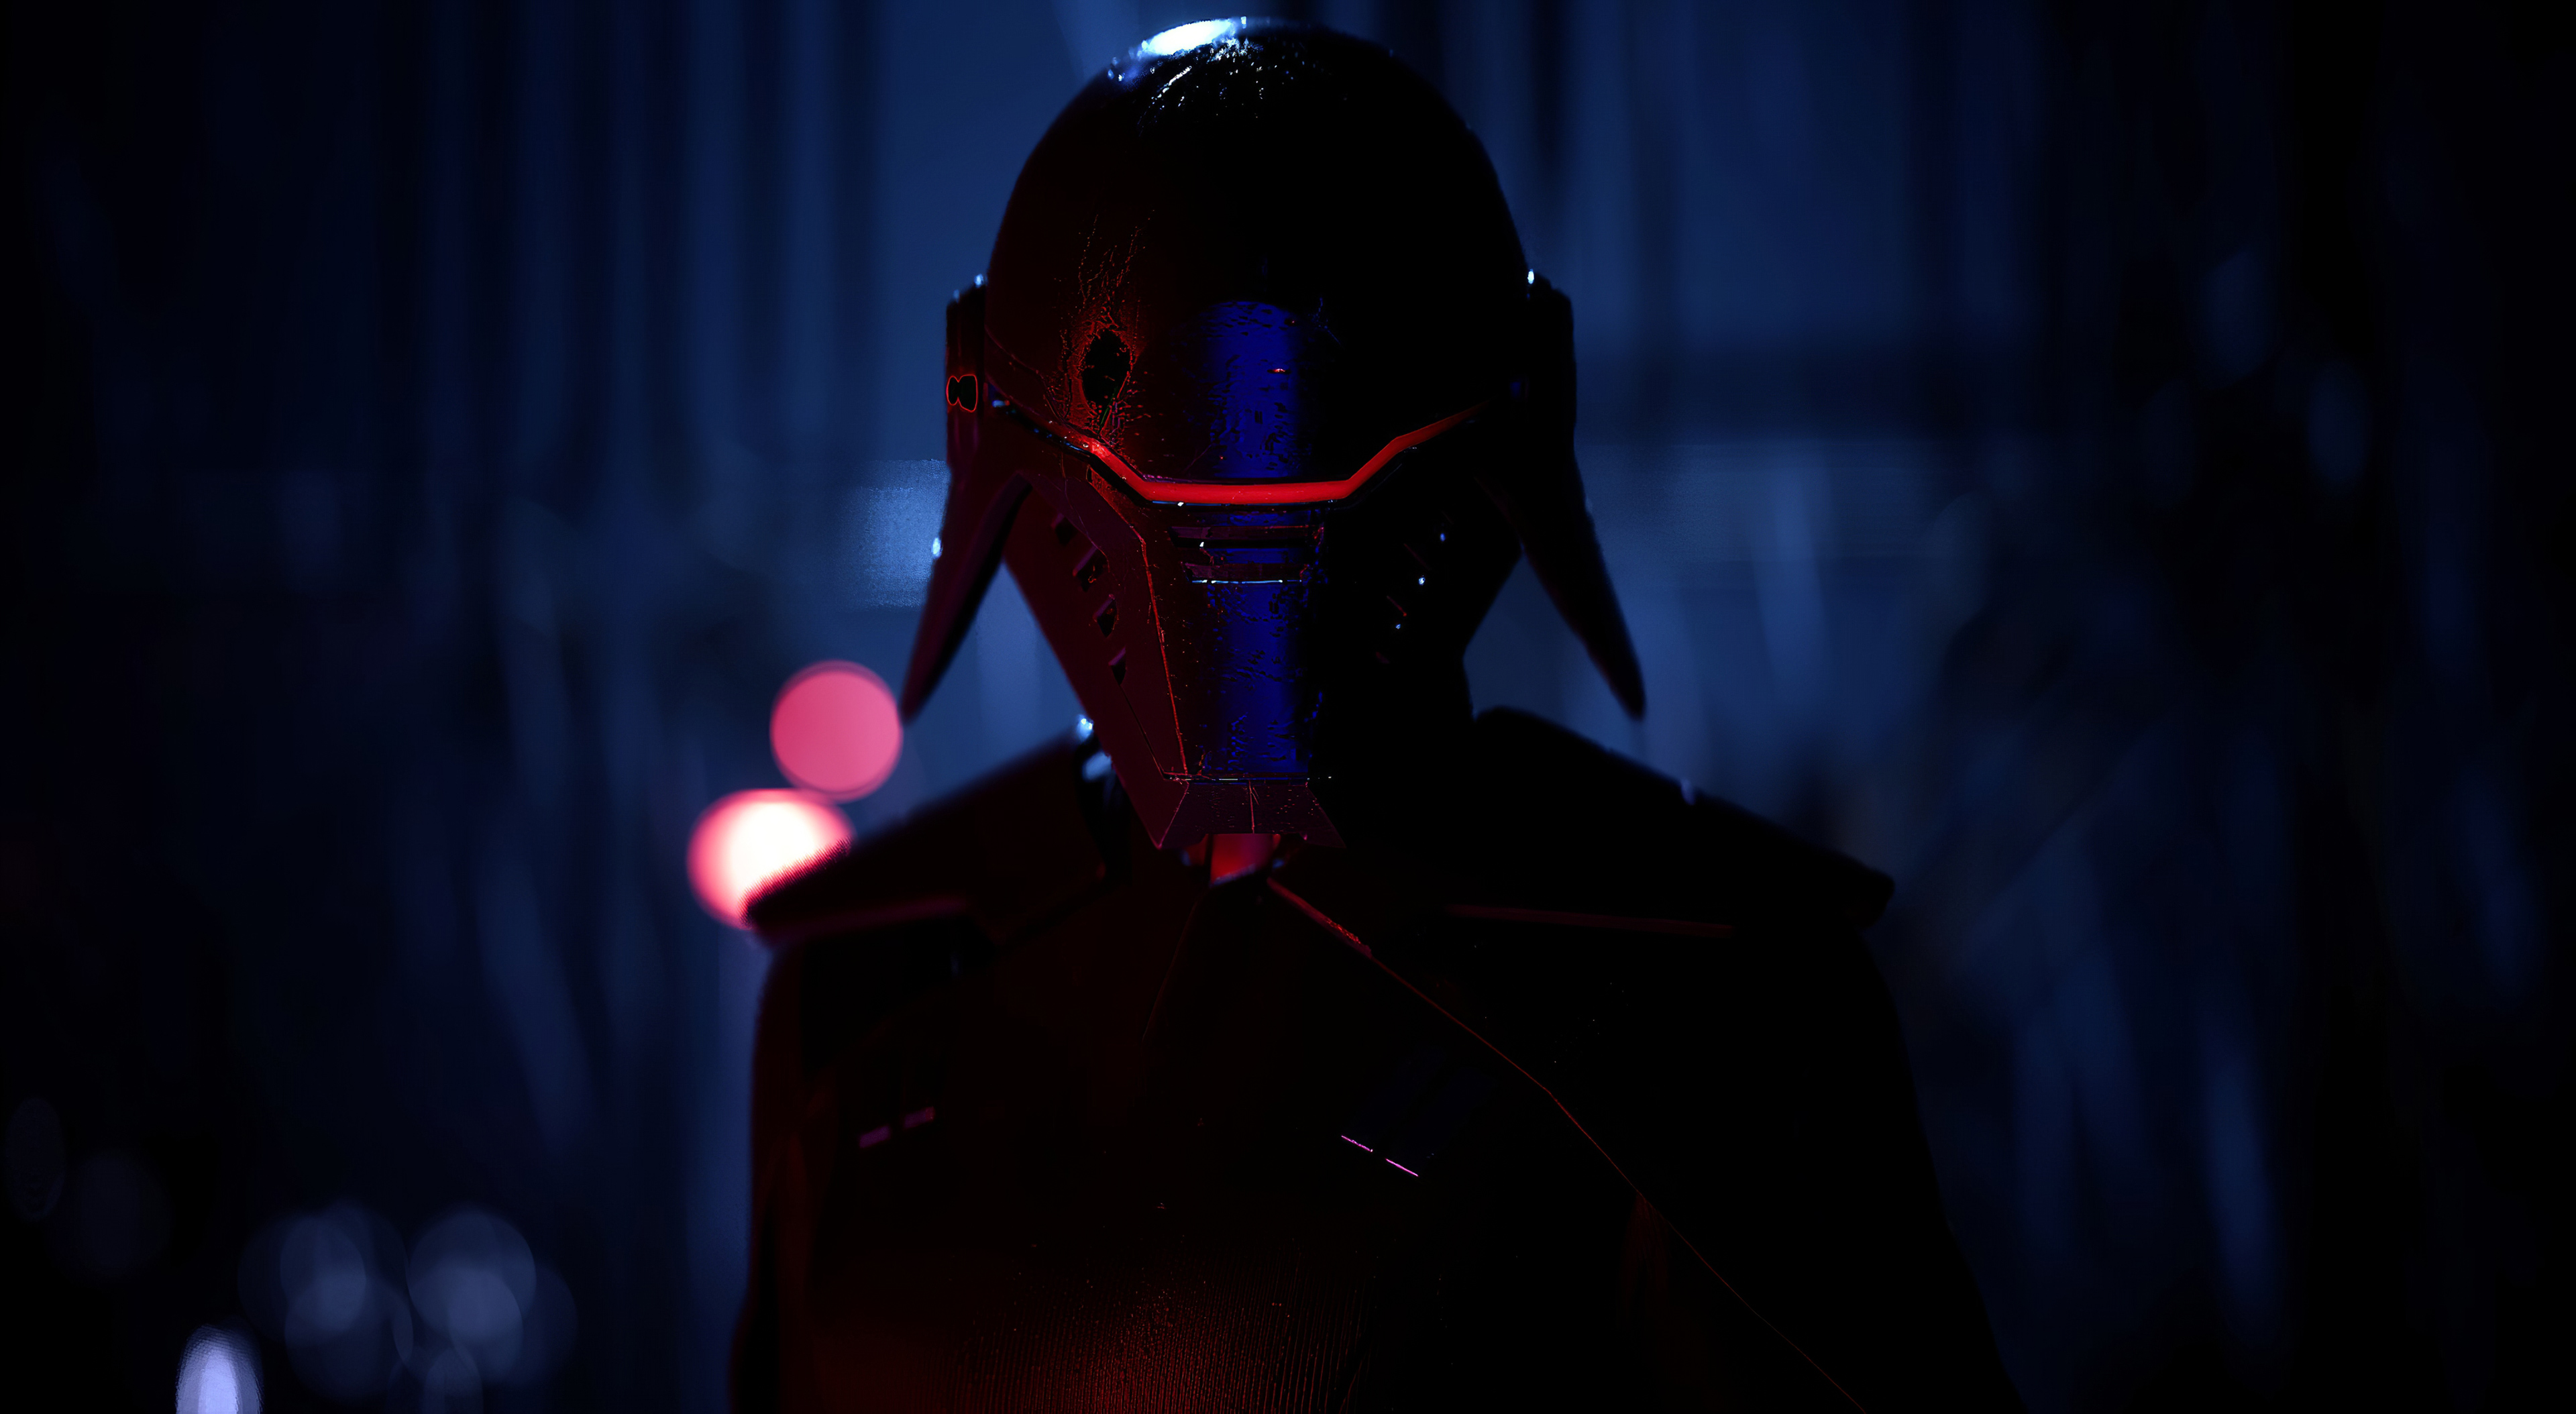 General 3840x2108 video game art video game characters Jedi: Fallen Order second sister video games dark 2019 (year) Inquisitor Star Wars Sith